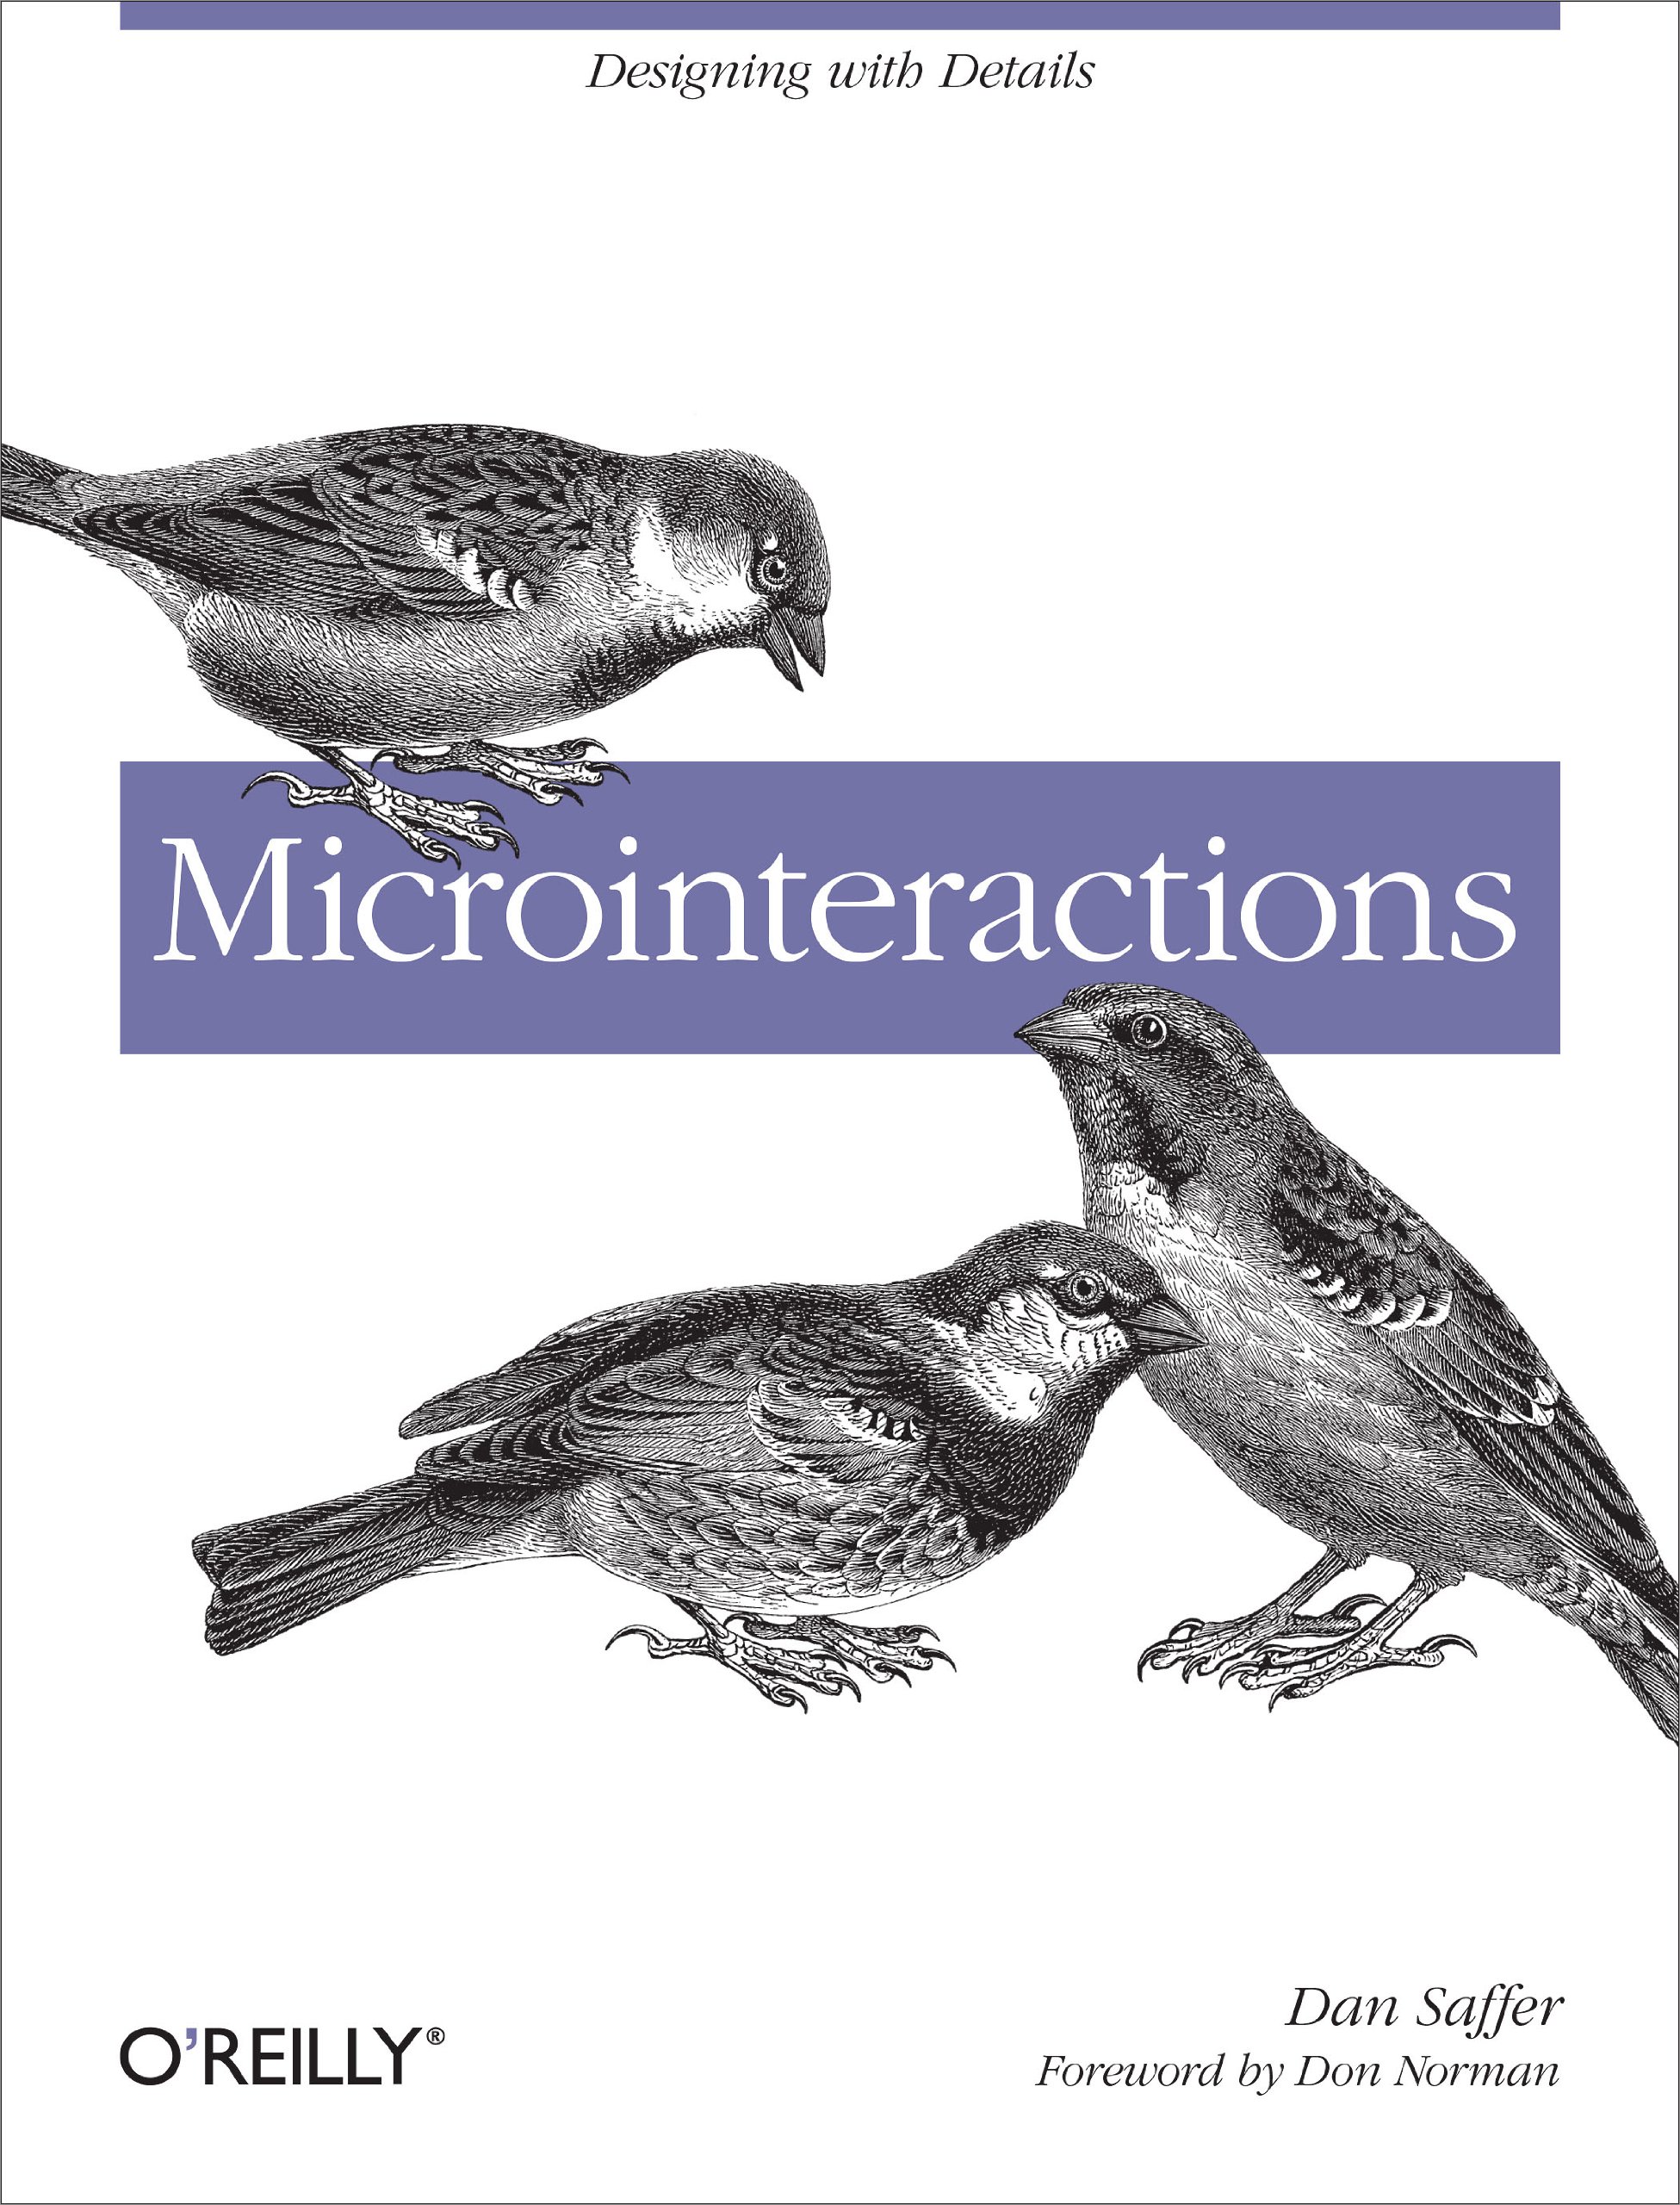 Microinteractions: Designing with Details by Dan Saffer